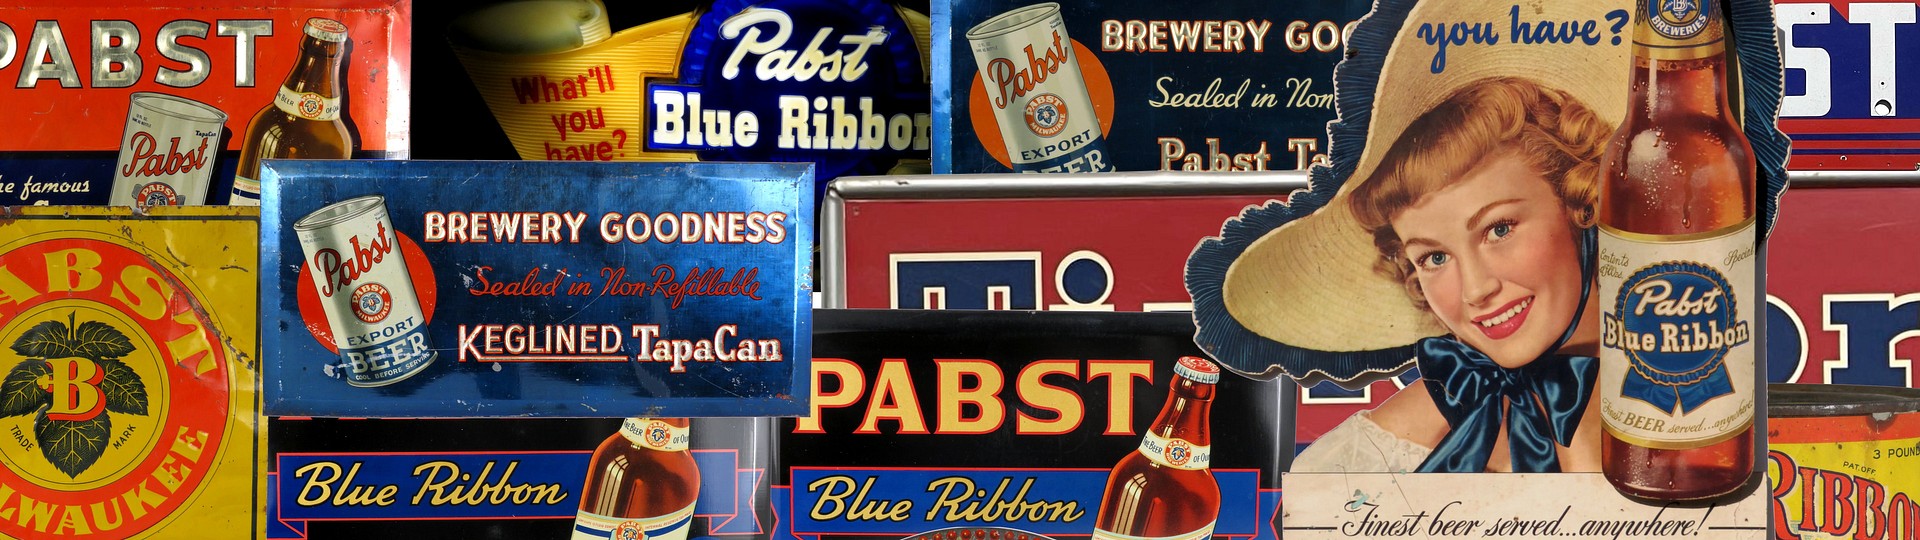 Vintage Pabst Blue Ribbon Beer Advertising Auction Day 1 by TavernTrove